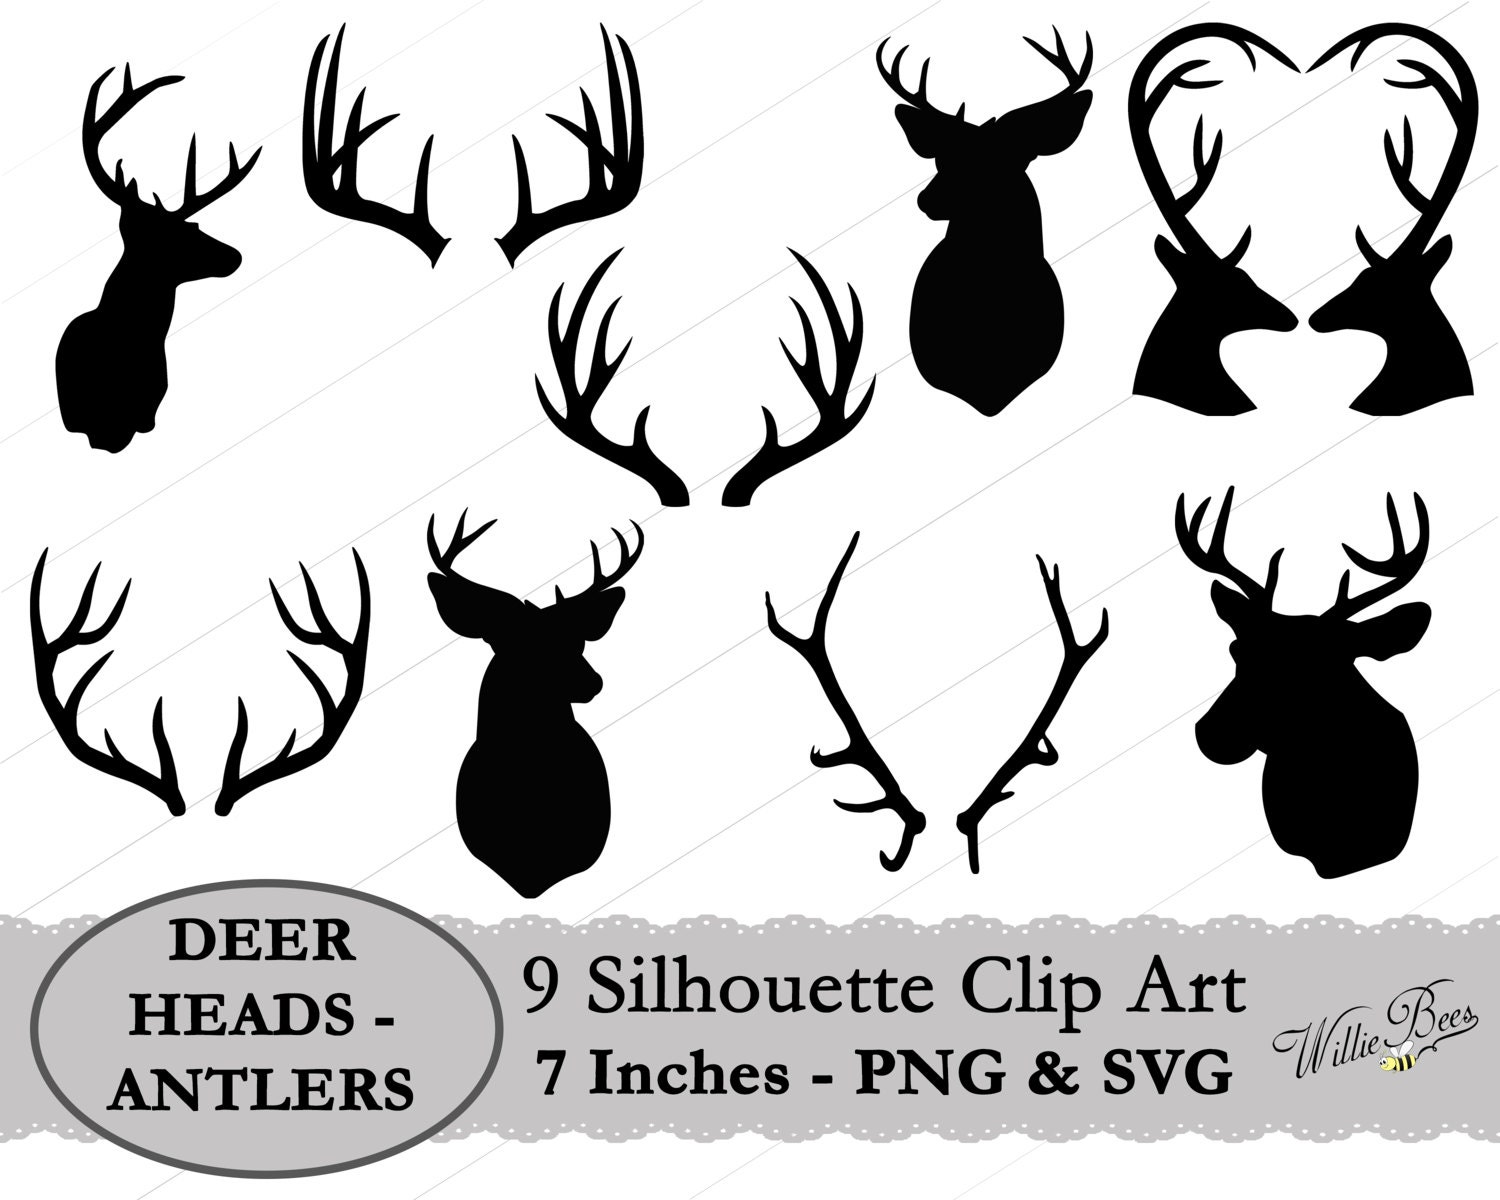 Deer Head and Antler Silhouette Clip Art - 7 inches - PNG ...